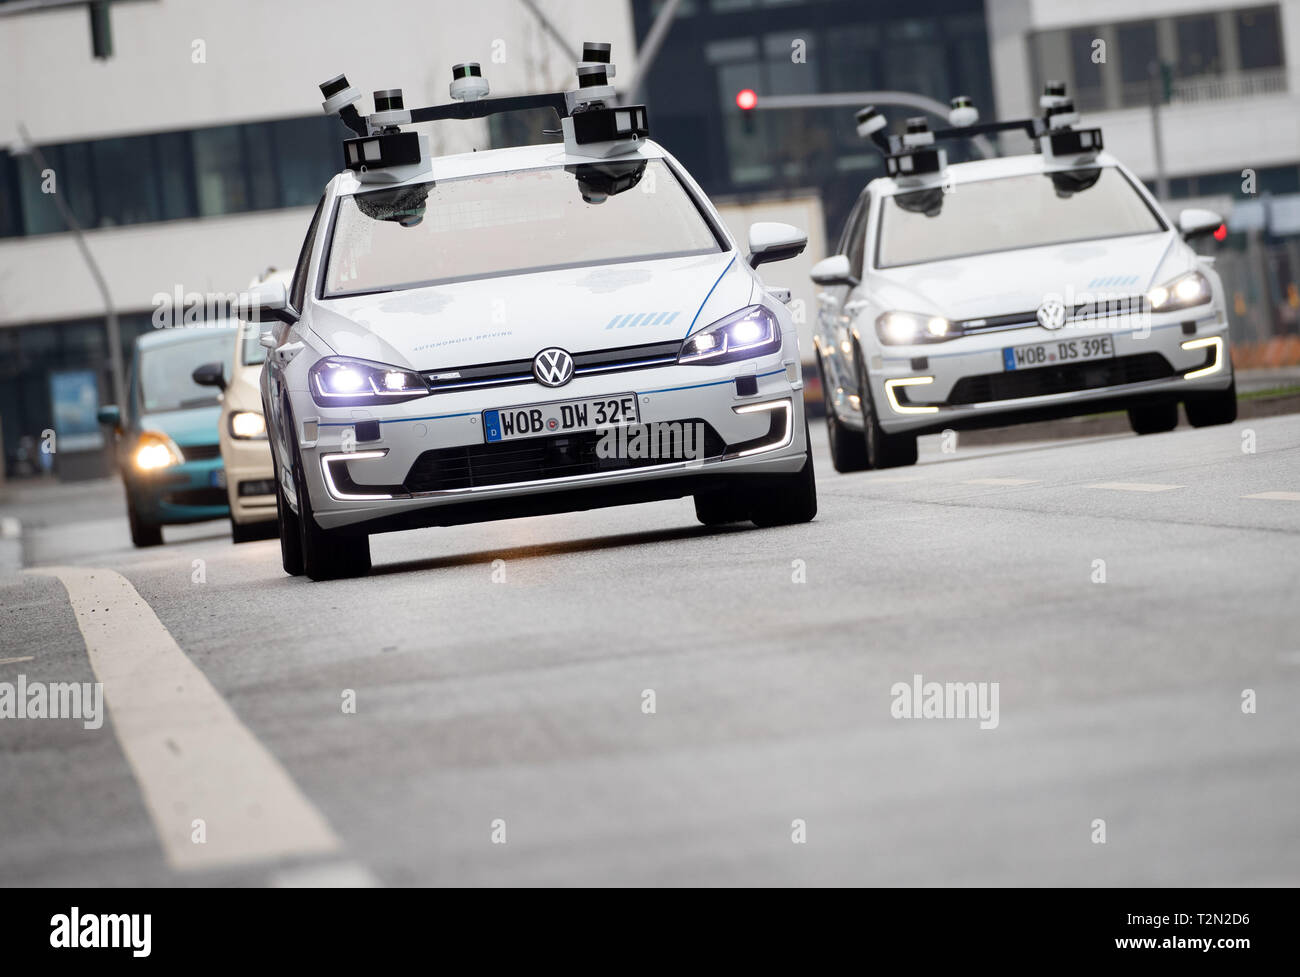 Hamburg, Germany. 03rd Apr, 2019. Two electric Golf cars from Volkswagen,  equipped with laser scanners, cameras, ultrasonic sensors and radar for  fully automatic driving, are on their way to a photo shoot